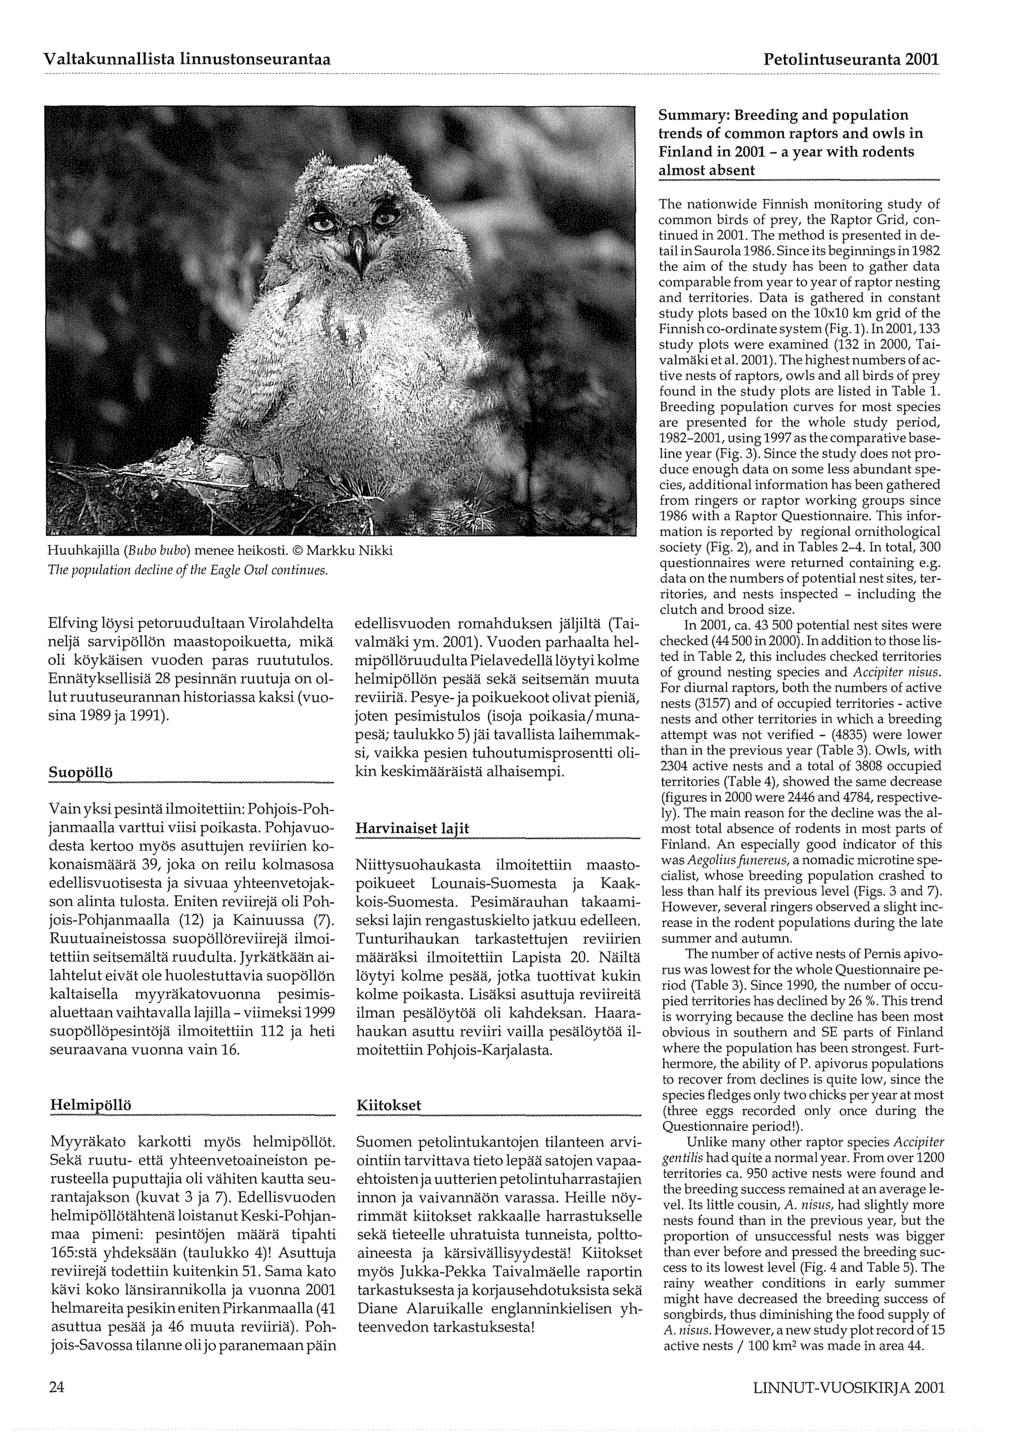 Summary: Breeding and population trends of common raptors and owls in Finland in 2001 - a year with rodents almost absent Huuhkajilla (Bubo bubo) menee heikosti.